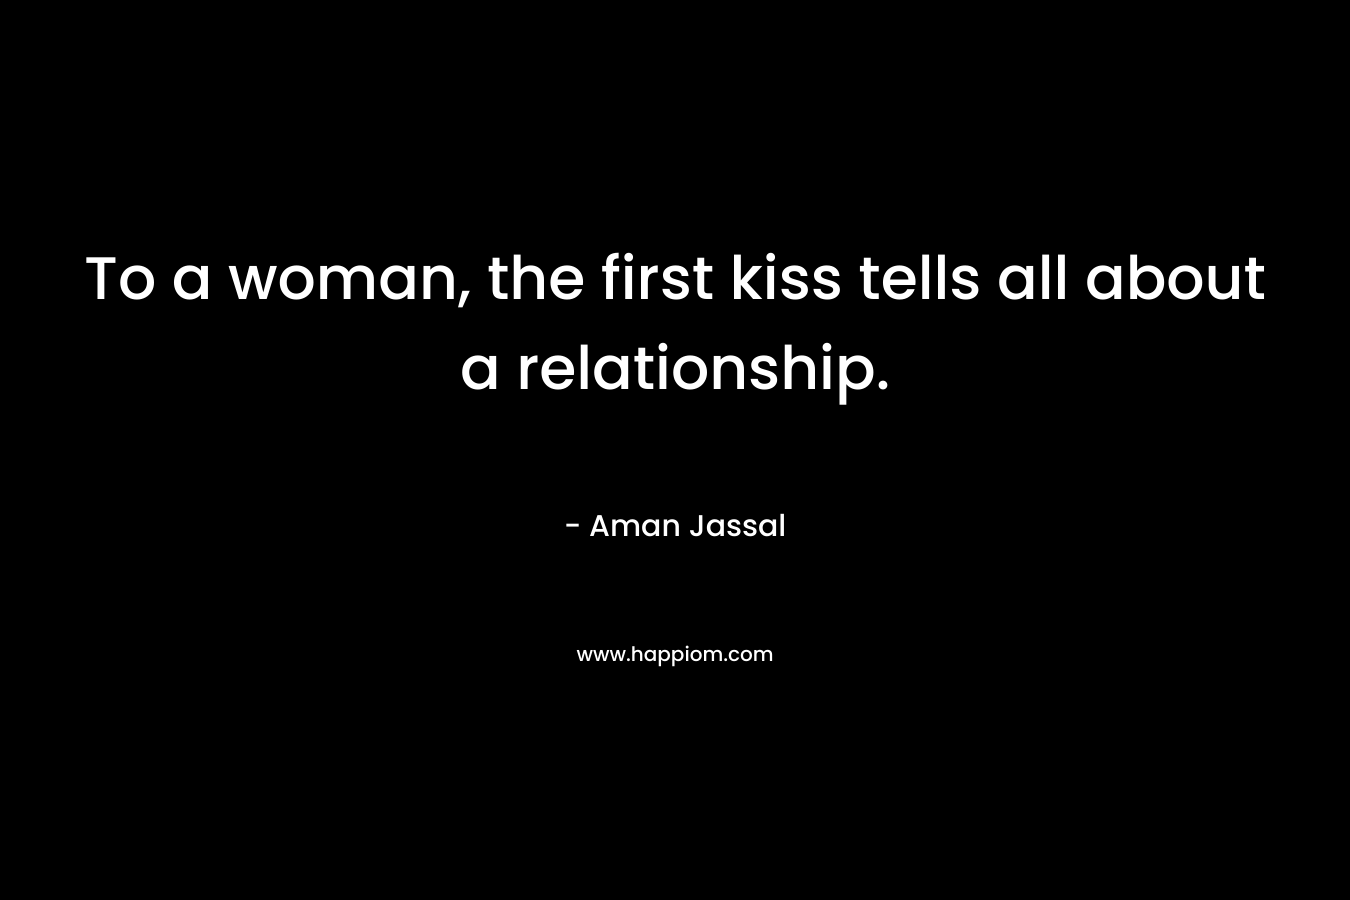 To a woman, the first kiss tells all about a relationship.